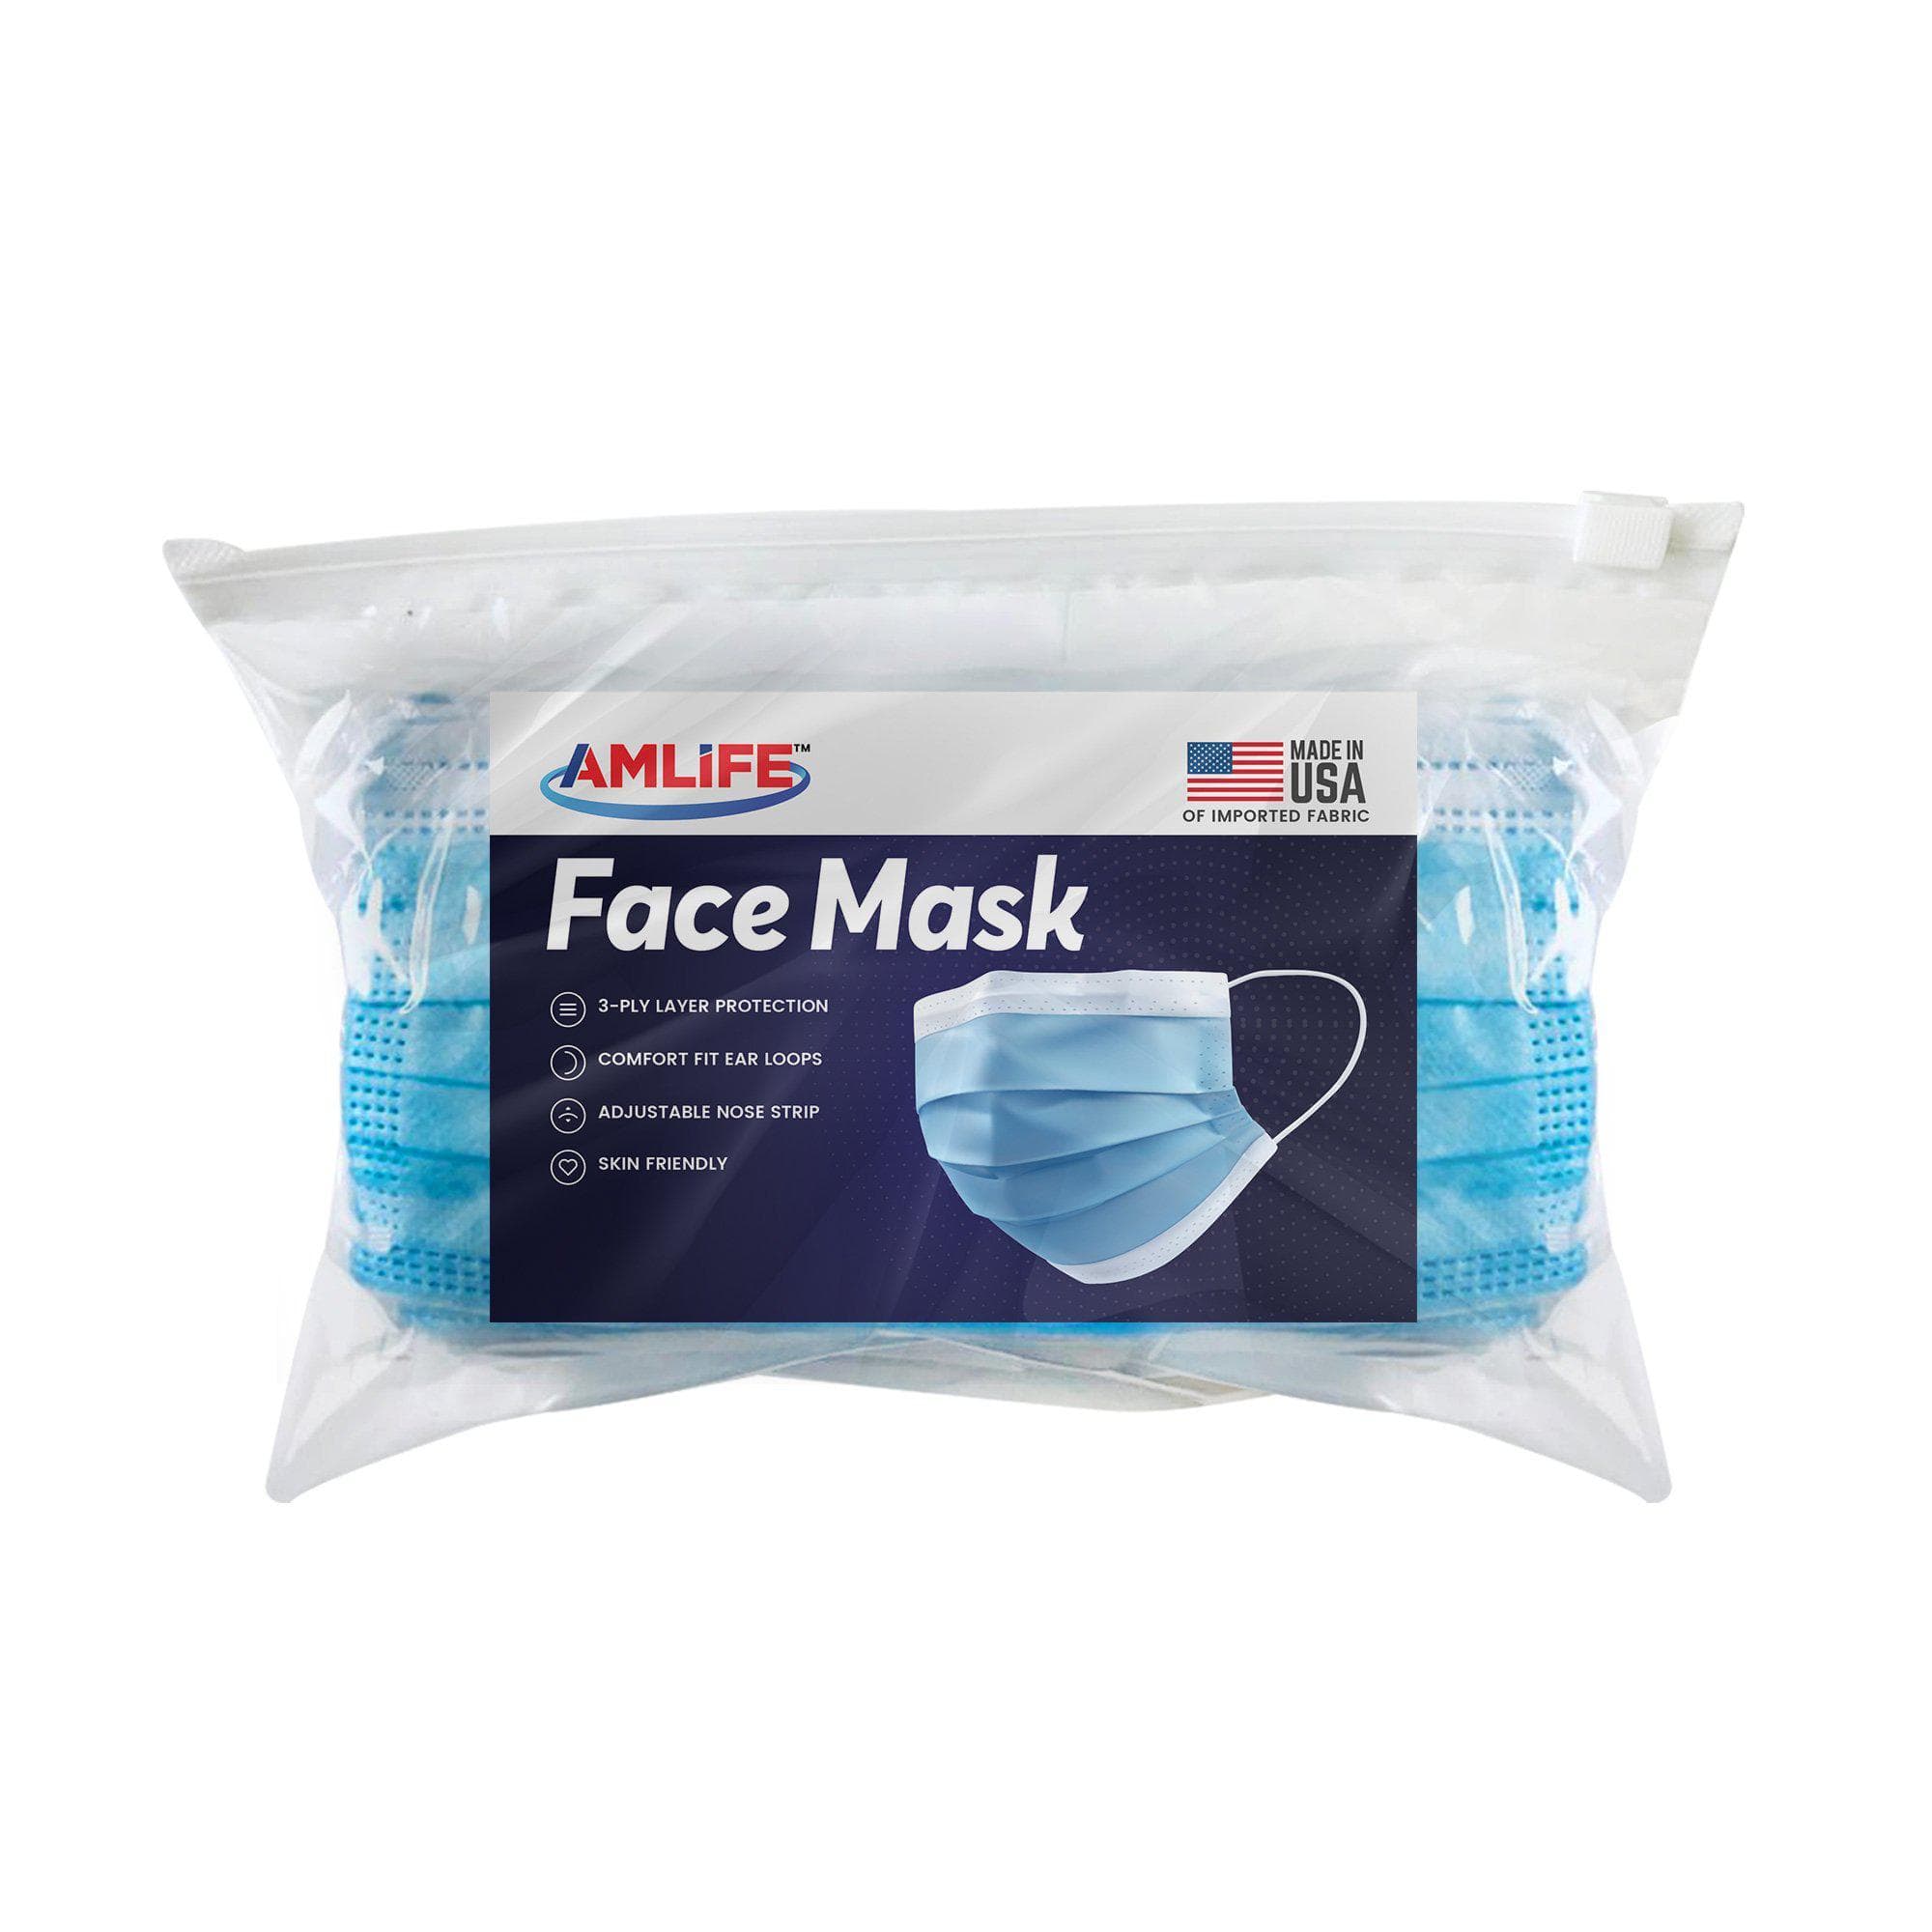 Amlife 50 Pack Face Mask Blue Made in USA Imported Fabric